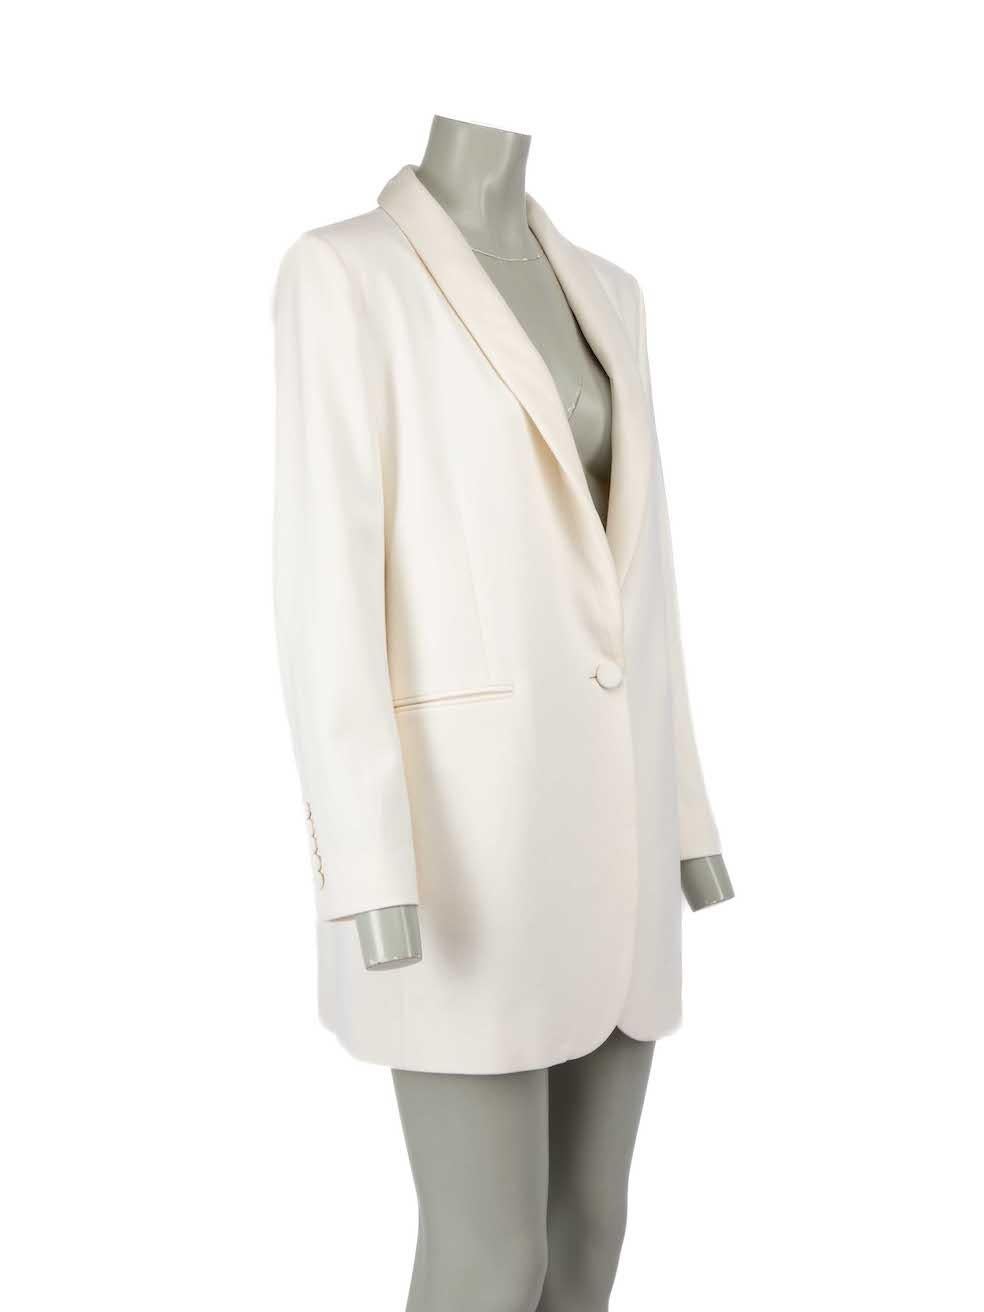 CONDITION is Very good. Hardly any visible wear to jacket is evident on this used The Row designer resale item.
 
 Details
 Ecru
 Wool
 Tailored blazer
 Button fastening
 Sheer layered lapel detail
 2x Front pockets
 2x Internal pockets
 
 
 Made in